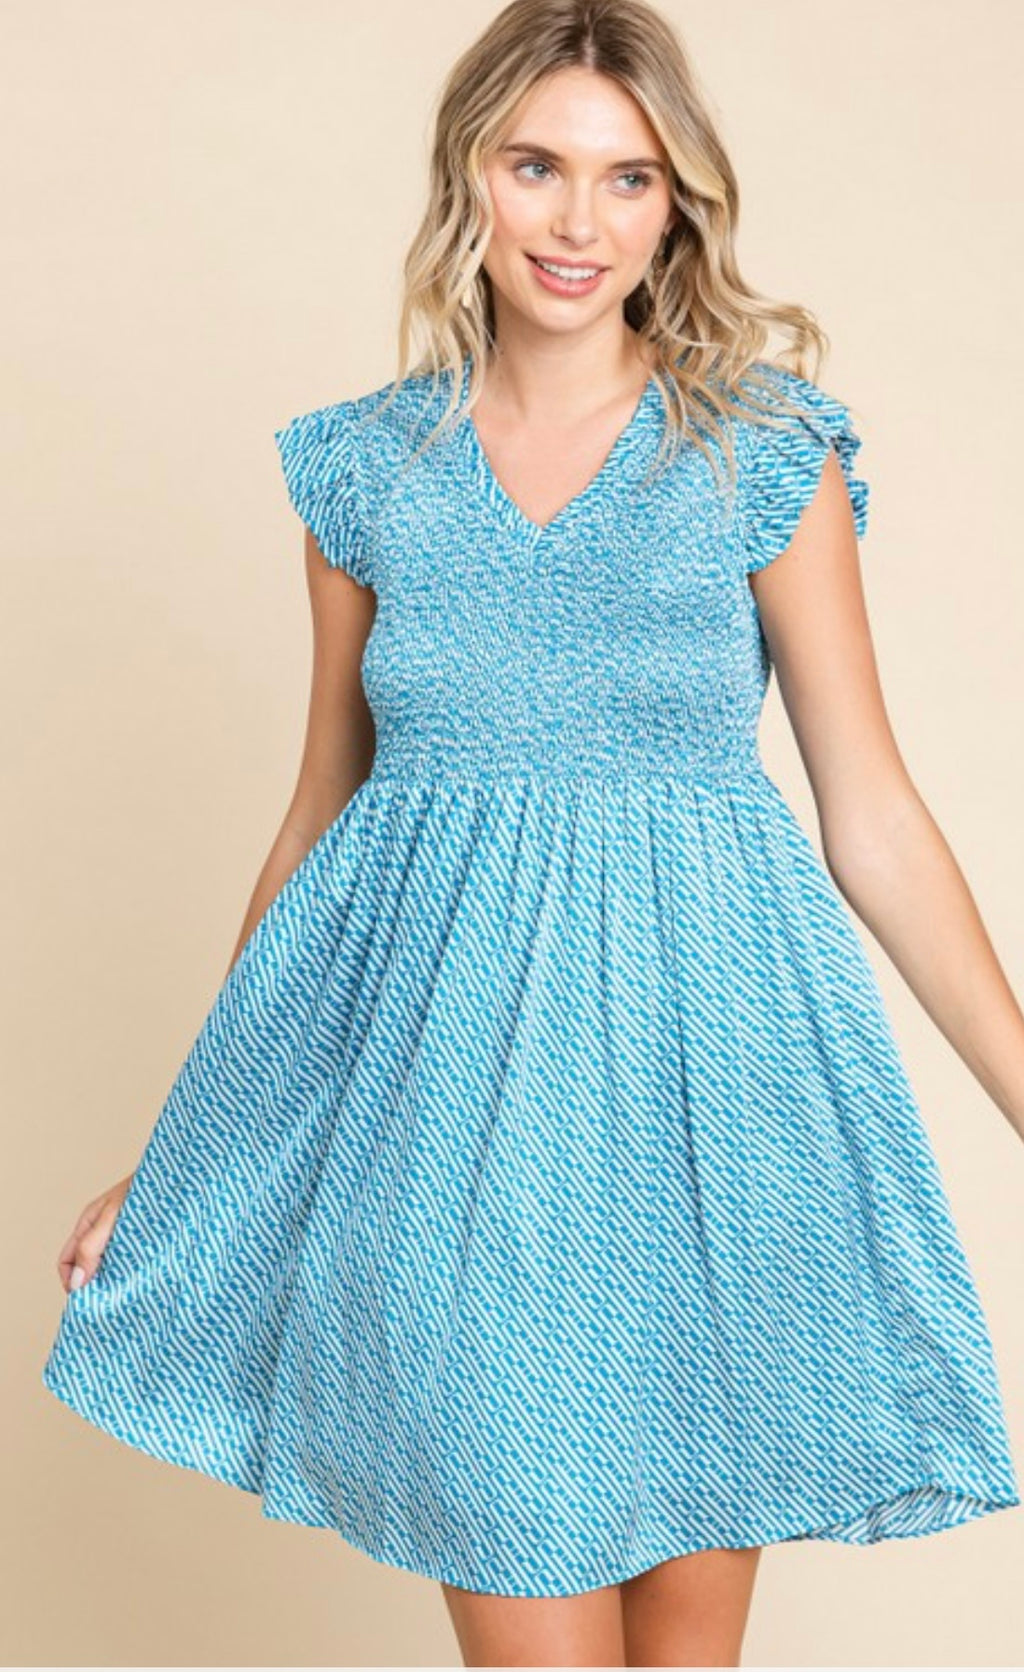 Blue Printed Satin Dress with Ruffle Detail